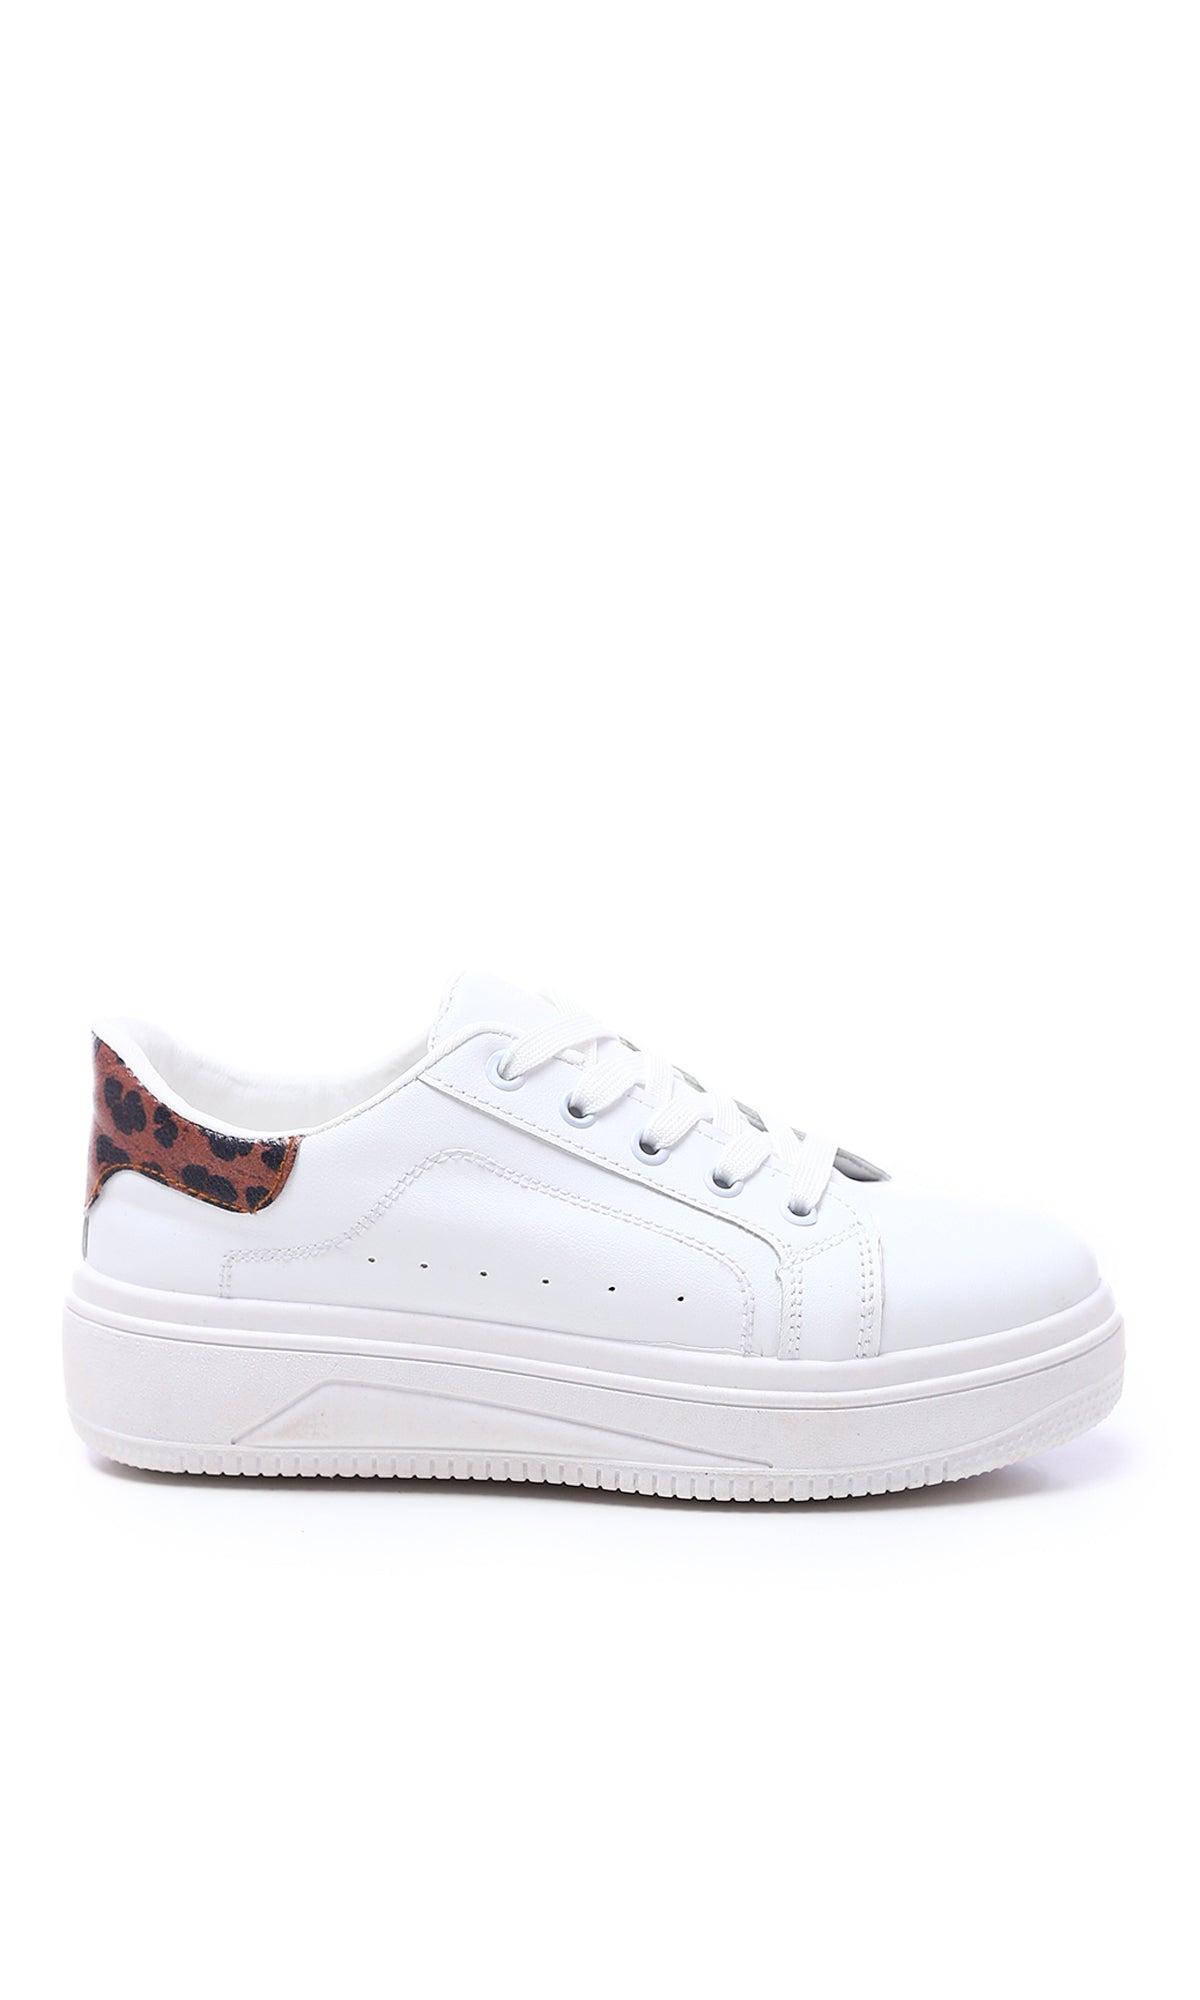 O177889 Round Toecap Sneakers With Leopard Back - White